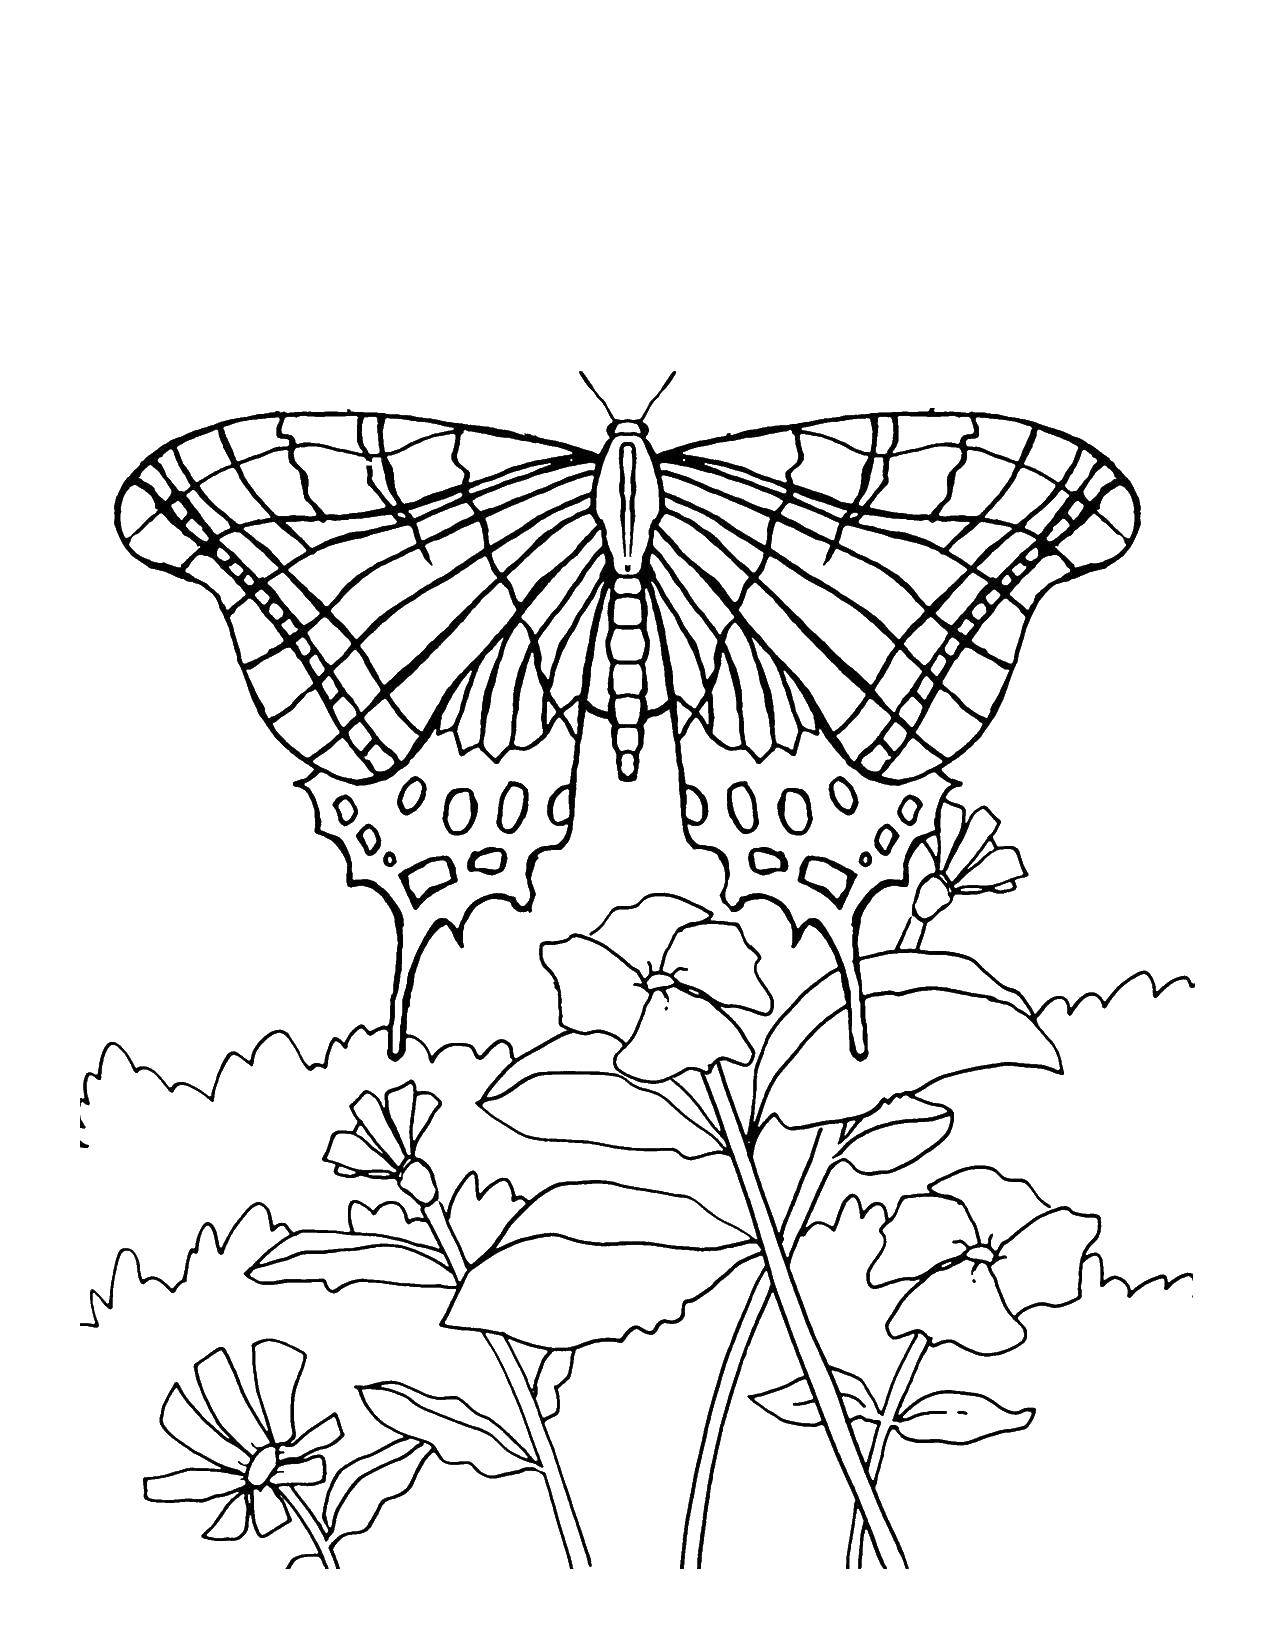 Coloring Butterfly with beautiful wings on the flowers. Category Flowers. Tags:  flowers, butterflies, butterfly.